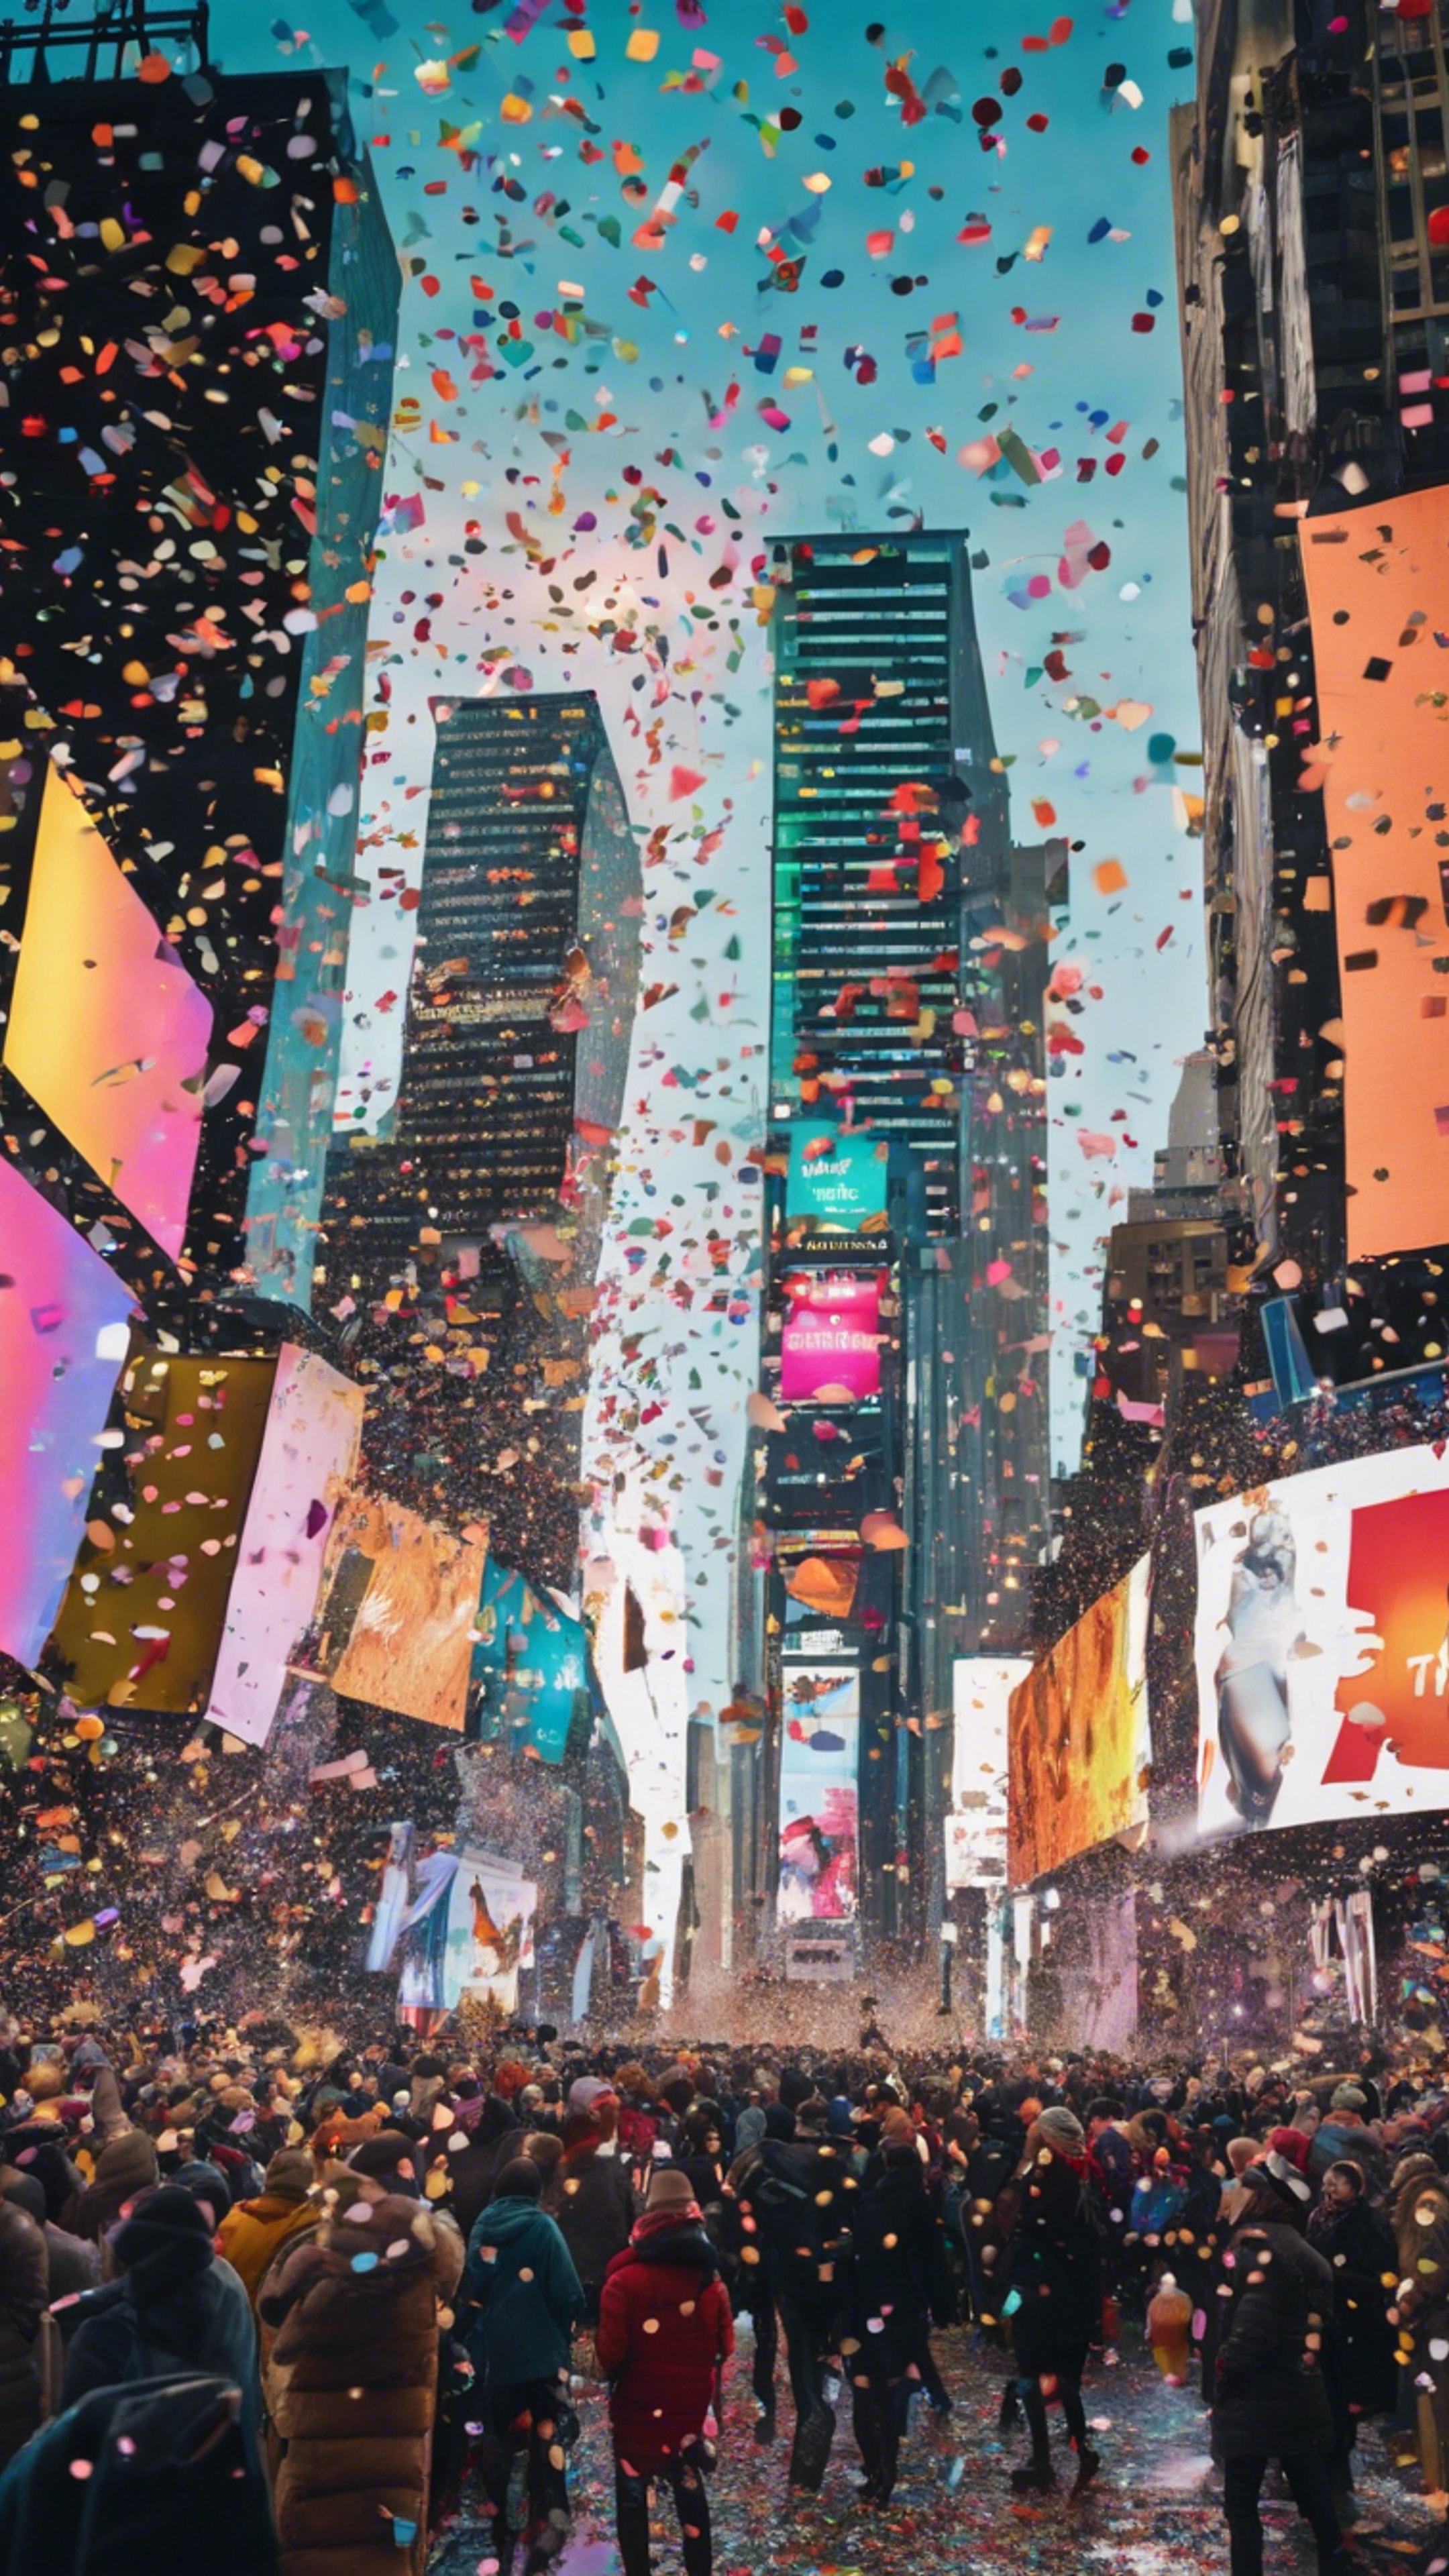 A lively crowd of people, dressed in festive attire, celebrate New Year's Eve in Times Square, New York City with colourful confetti falling from the sky. Wallpaper[16dbda32010942e6b062]